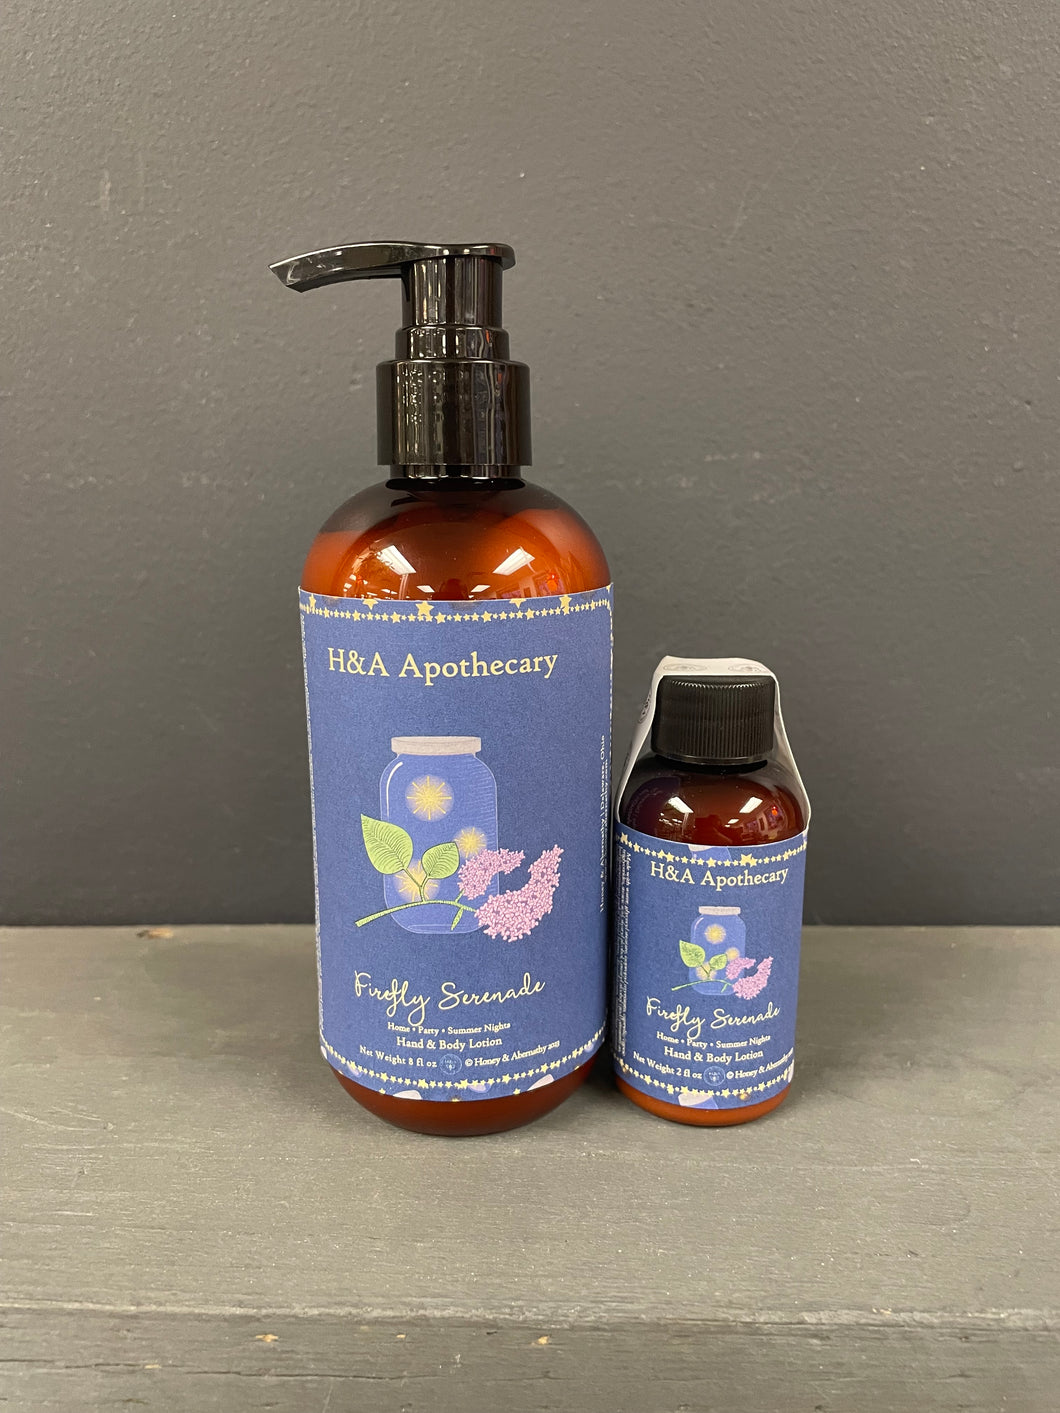 H&A Apothecary Firefly Serenade Hand & Body Lotion